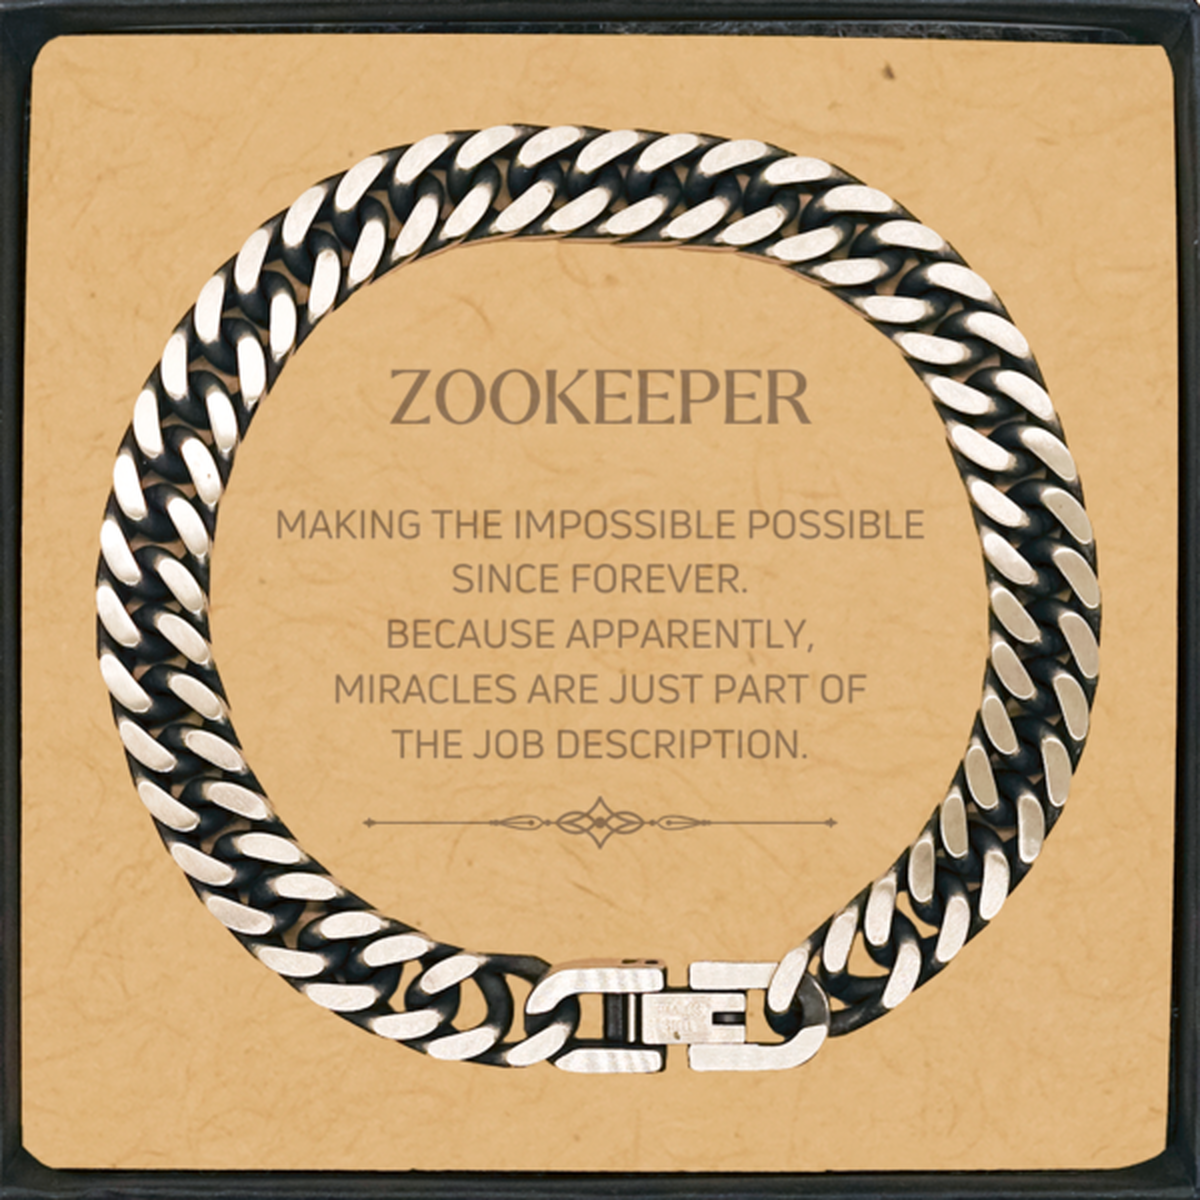 Funny Zookeeper Gifts, Miracles are just part of the job description, Inspirational Birthday Cuban Link Chain Bracelet For Zookeeper, Men, Women, Coworkers, Friends, Boss